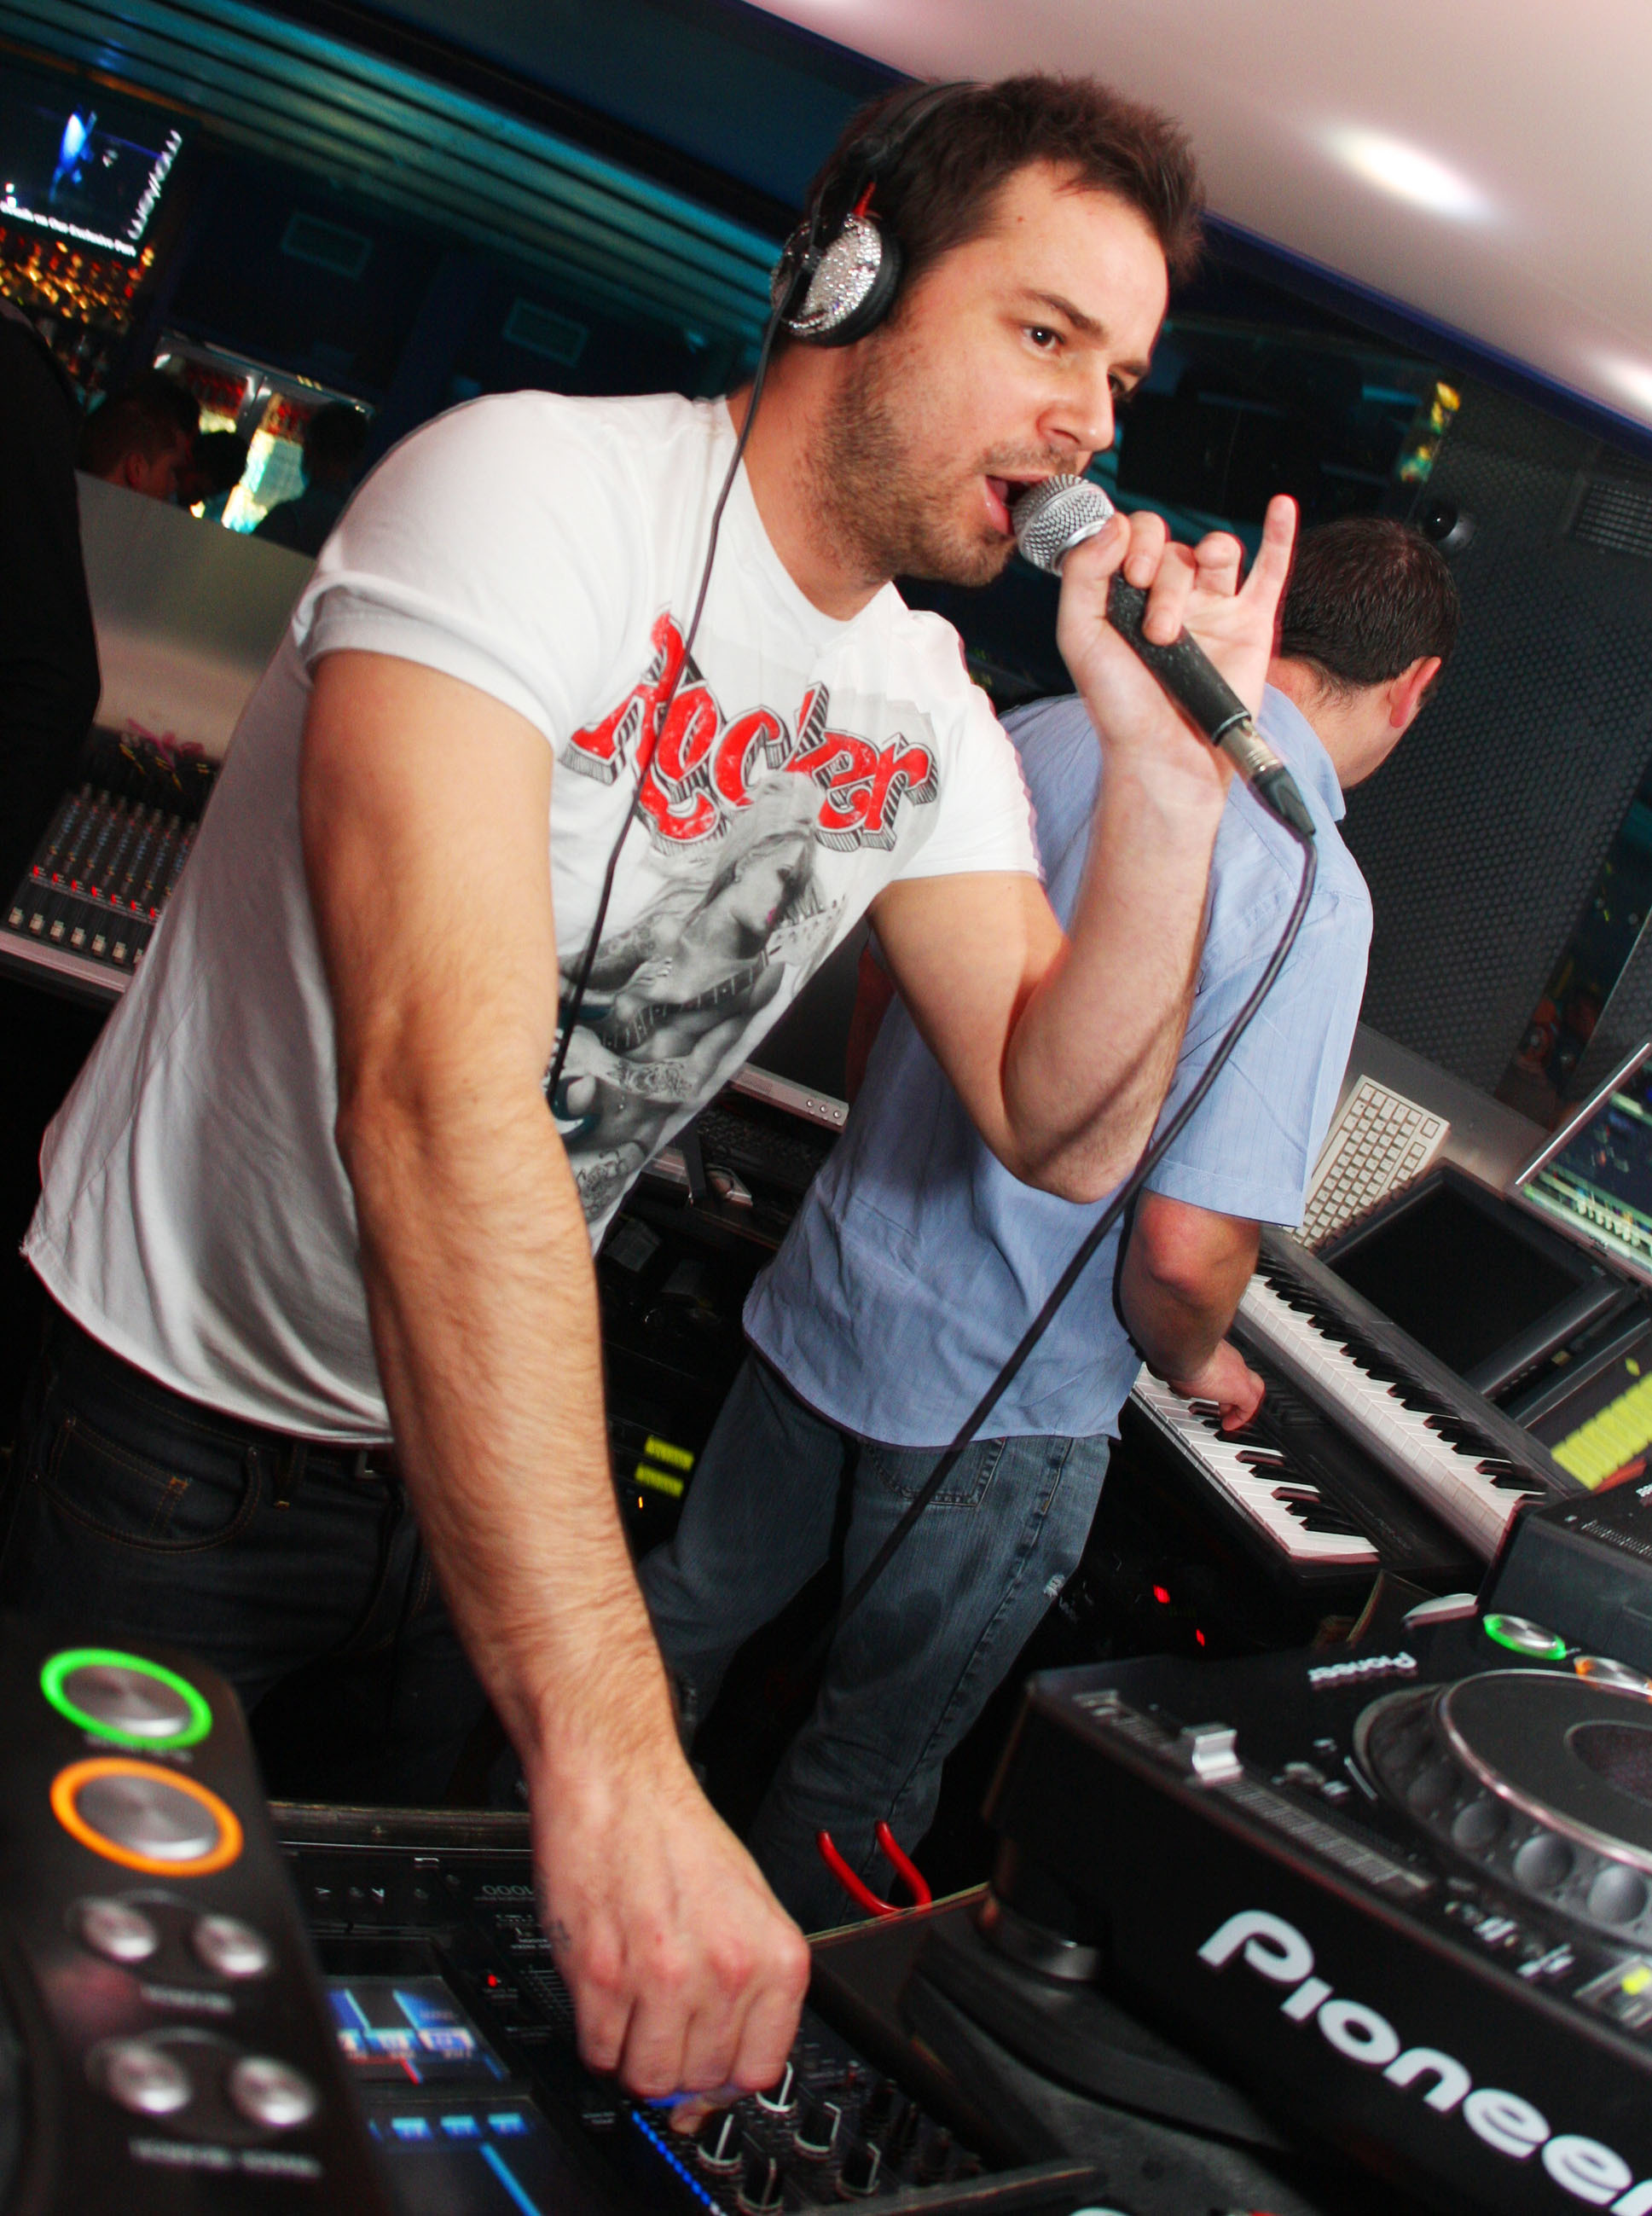 On the decks - Danny Dyer got the crowd moving whenever he headed to Mayhem for a special appearance